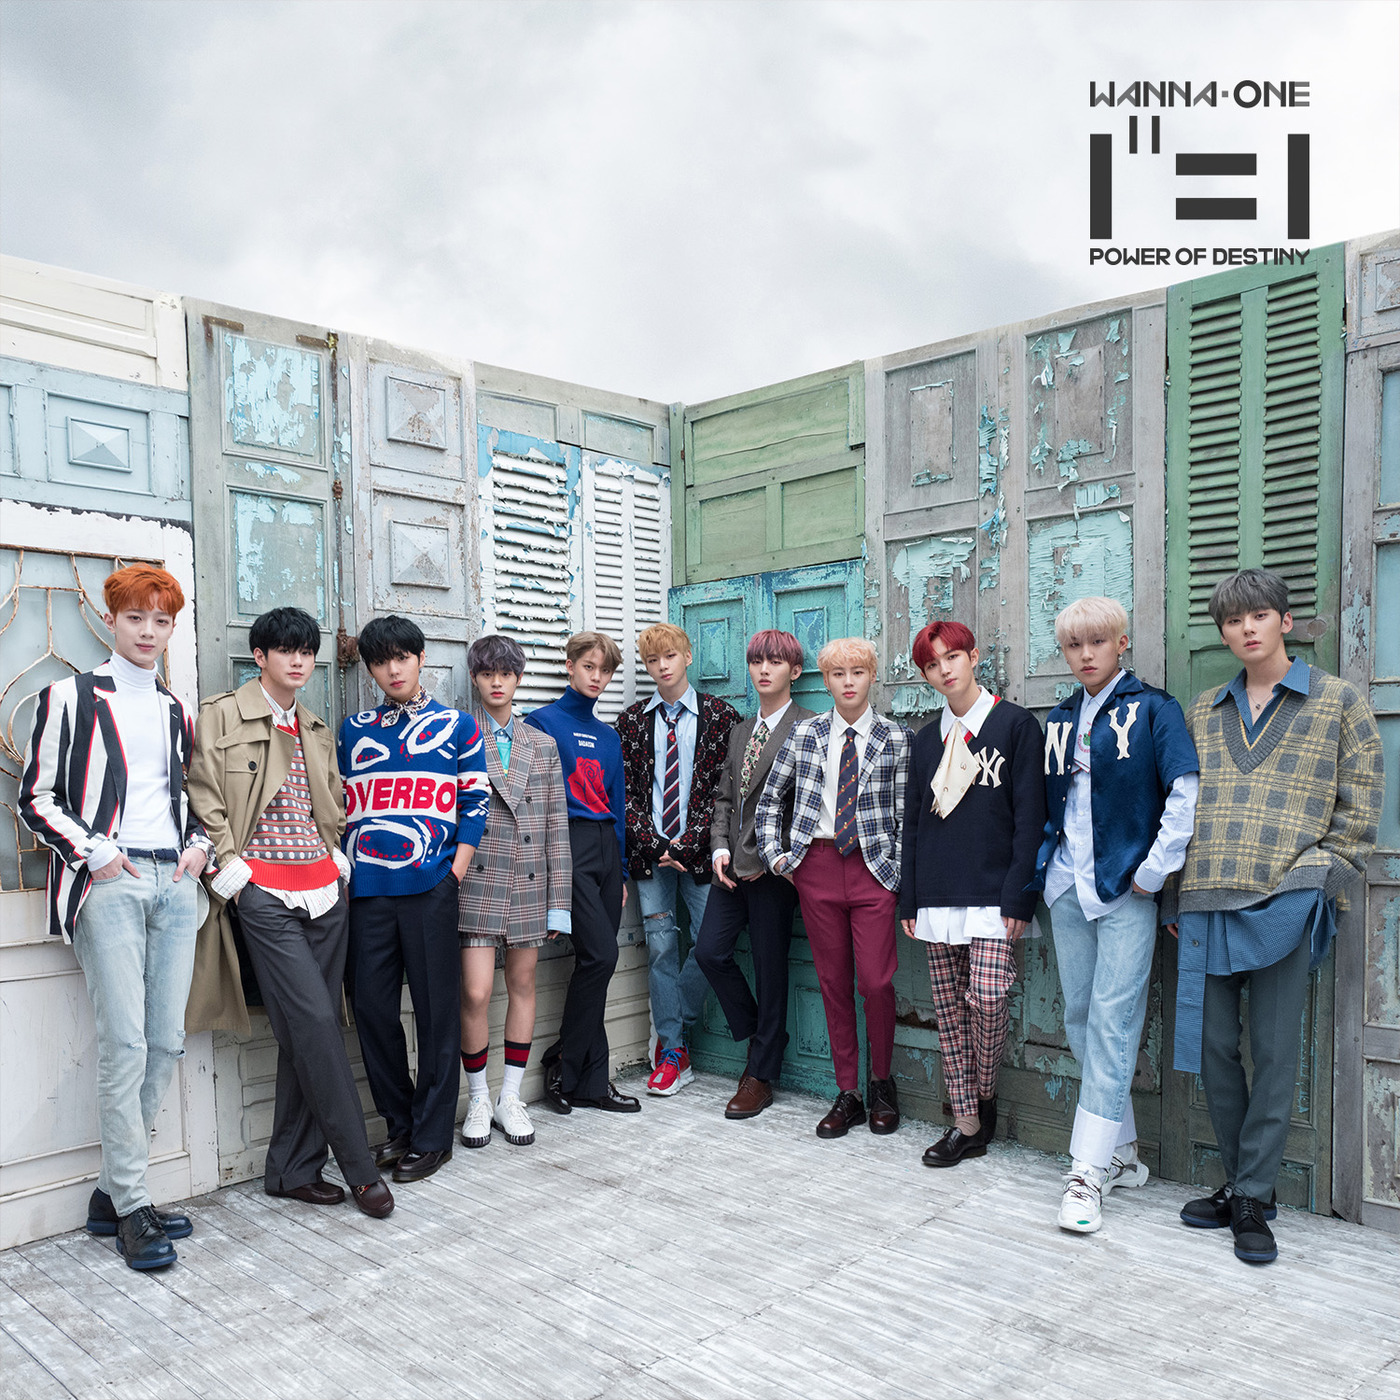 Wanna One released all of the romance version teaser Images of its first full-length album 111=1 (POWER OF DESTINY) through official SNS from the 9th to the 11th.Wanna Ones romance version teaser, which was released on November 11, has a charm that is 180 degrees different from the adventure teaser, which emits charisma and masculine beauty in the background of mysterious space.The members are attracted to the eyes by showing off the same warm visuals as the male protagonist of the romance drama, such as a colorful yet eye-catching tie, a dandy style jacket, a knit and a turtleneck with warm warmth.Through the group Image, the members who showed a warm and warm aspect were in perfect harmony and combined to further raise expectations for Wanna One to come back with the Spring Wind.111=1 (POWER OF DESTINY), which will be released on the 19th, is Wanna Ones first Music album, which is shaped by the formula 111=1, which was the will to pioneer the fate given by Wanna One, who has shown the arithmetic series such as 1x=1, 0+1=1, 1-1=0 and 1X1=1.The title song Spring Wind is a song that contains the fate (DESTINY) that you and I have missed each other as one, but the will to meet again and become one again against the fate, and it is expected to show the musicality of Wanna One which has grown even more.Wanna One held its long-awaited world tour ONE: WORLD in June, where it met fans in 14 cities around World for three months and painted World with Wanna Ones Golden Age, and confirmed its comeback on the 19th, which has steadily spurred preparations for the new album.Wanna One has gained its highest popularity by releasing its debut album 1X1=1 (TO BE ONE), prequel repackage 1-1=0 (NOTHING WITHOUT YOU) and its second mini album 0+1=1 (I PROMISE YOU) in succession.In addition, he won the first prize on the music charts, 10 music broadcasts, as well as various year-end awards ceremony, and made his presence imprint. He also formed a unit of four teams through his special album 1=1 (UNDIVIDED) to show new charm and growth potential.Wanna Ones first full-length album, 111=1 (POWER OF DESTINY), will be released on the 19th.